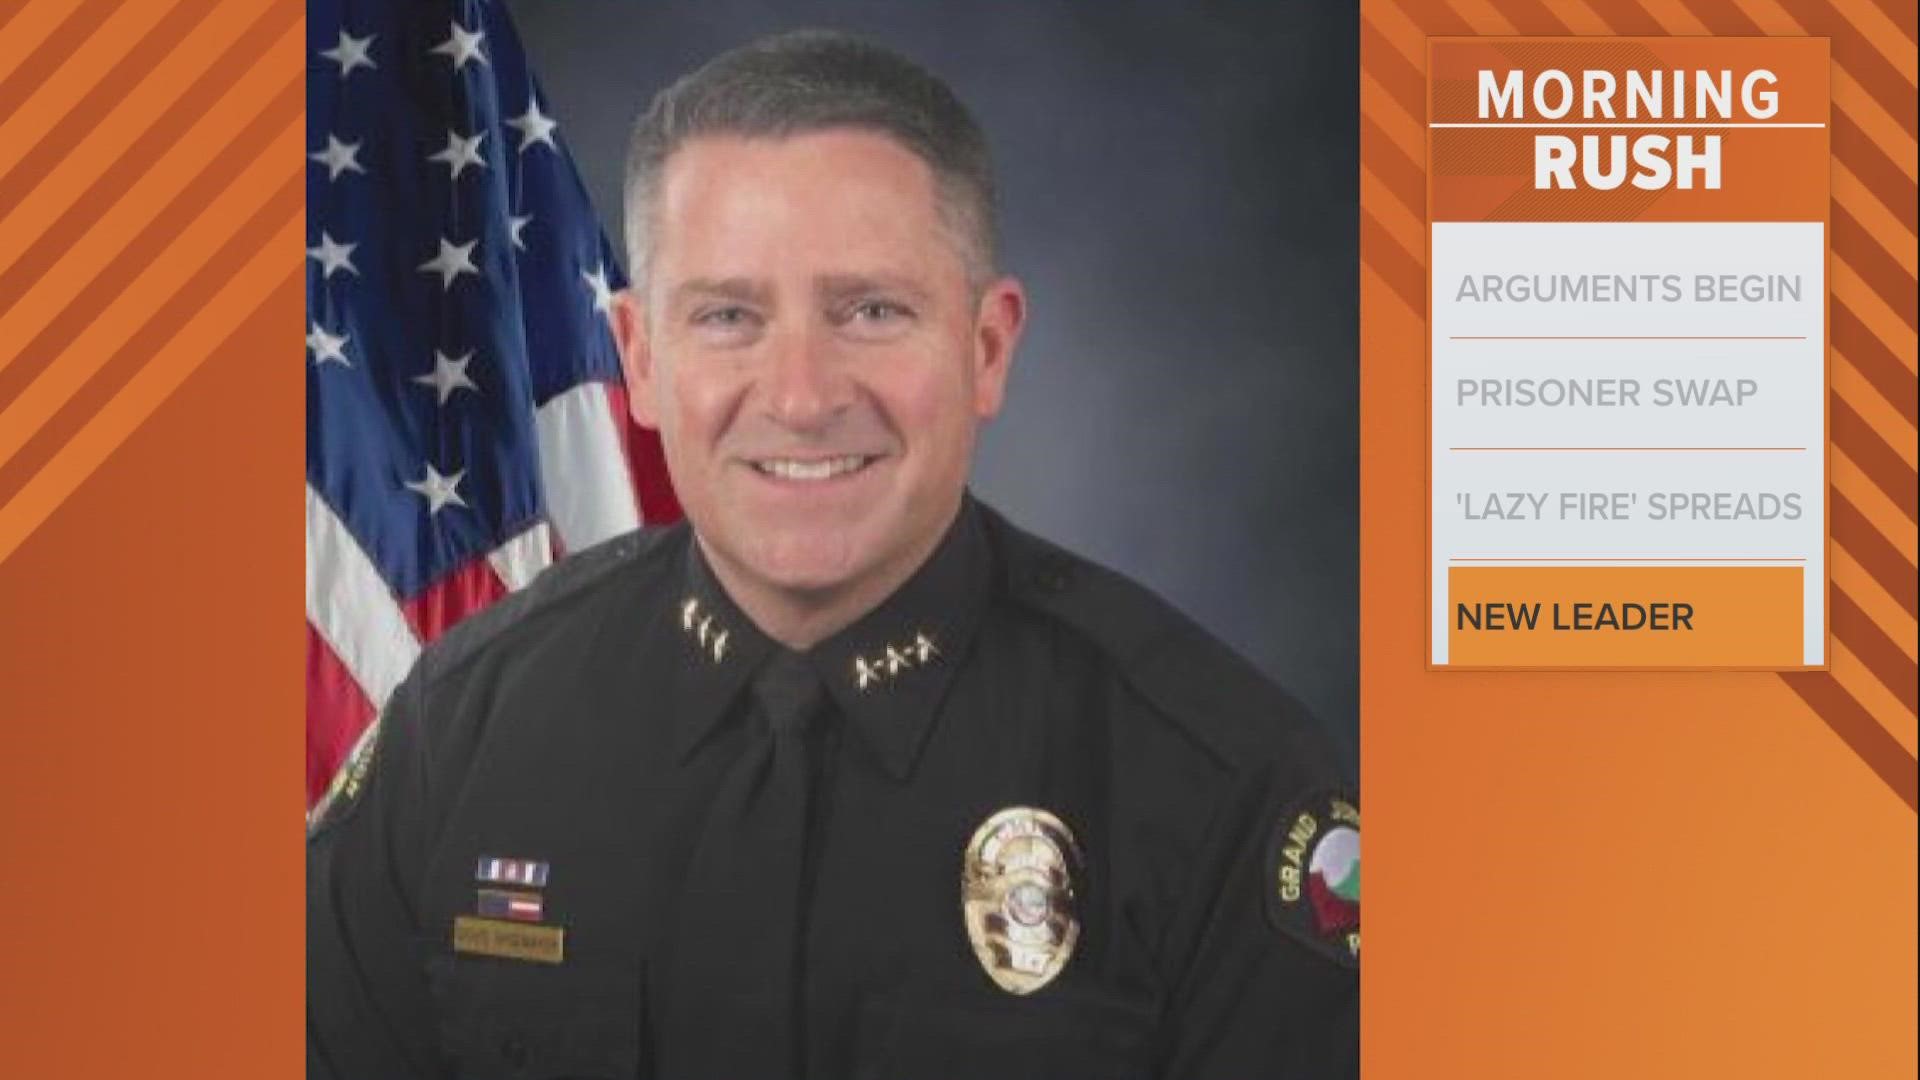 Incoming chief Doug Shoemaker was previously police chief in Grand Junction, Colorado.